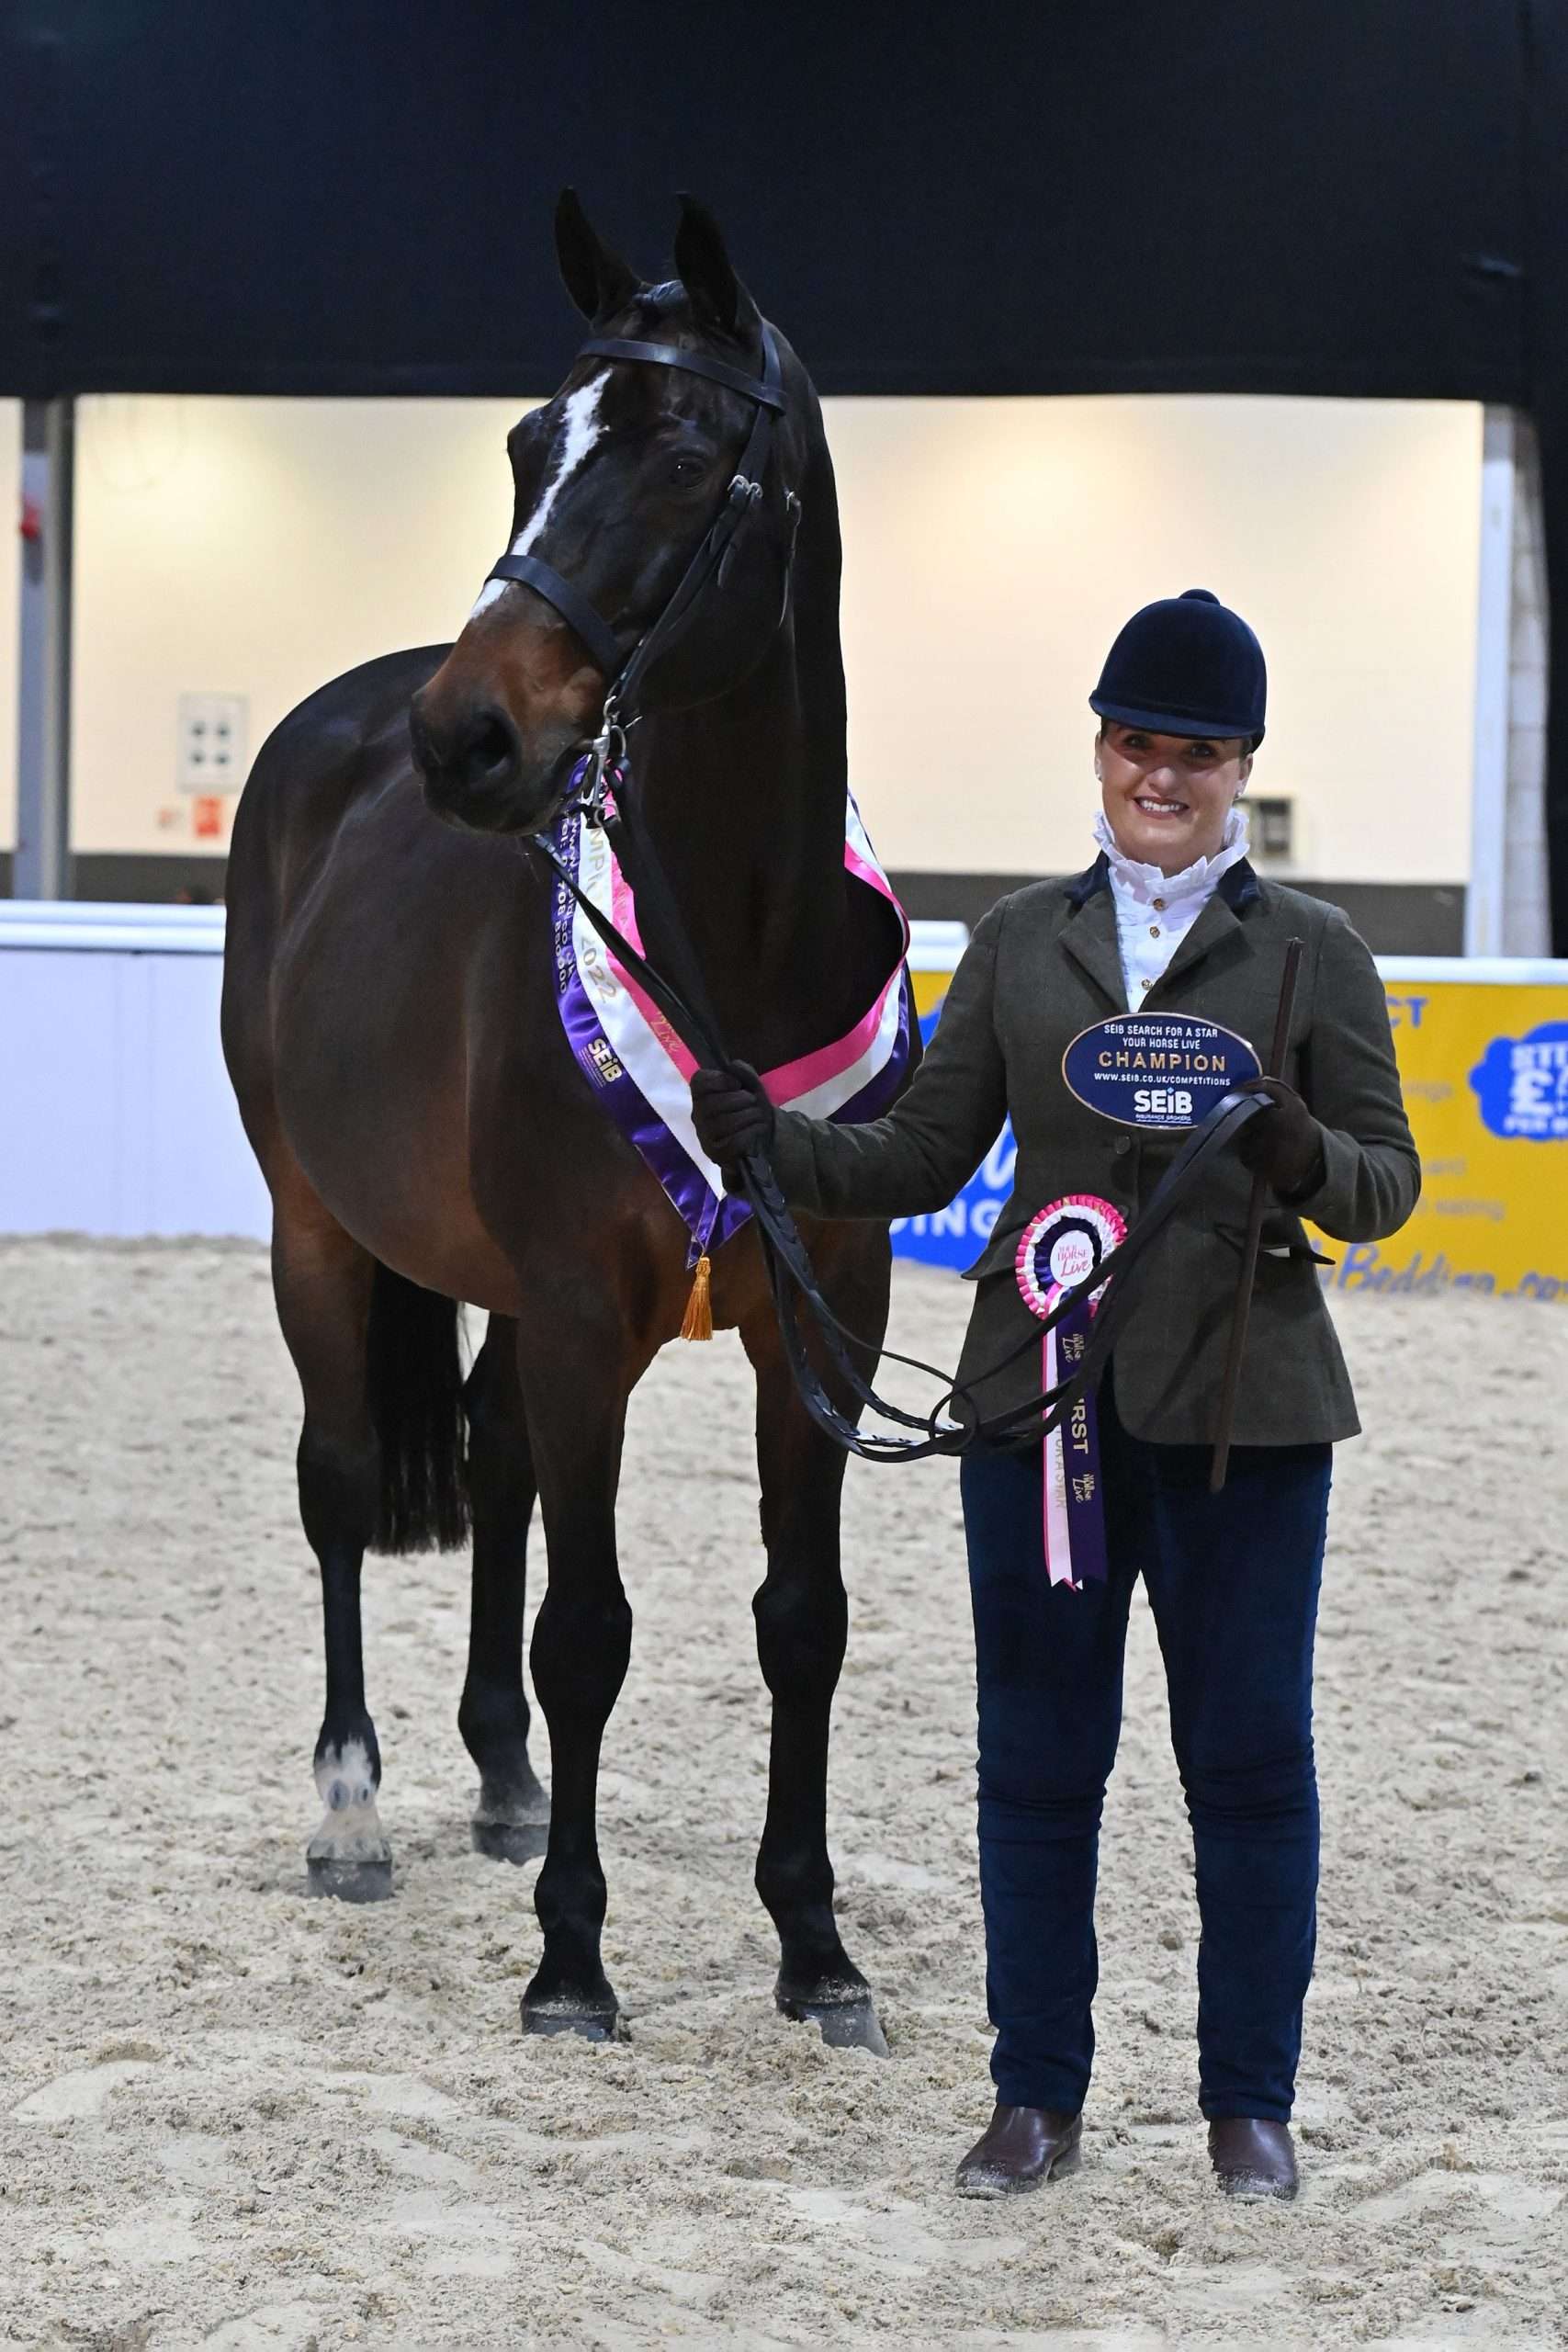 in-hand veteran which went to Lucy Ashworth and her own twenty-four-year-old bay gelding, Randall IV